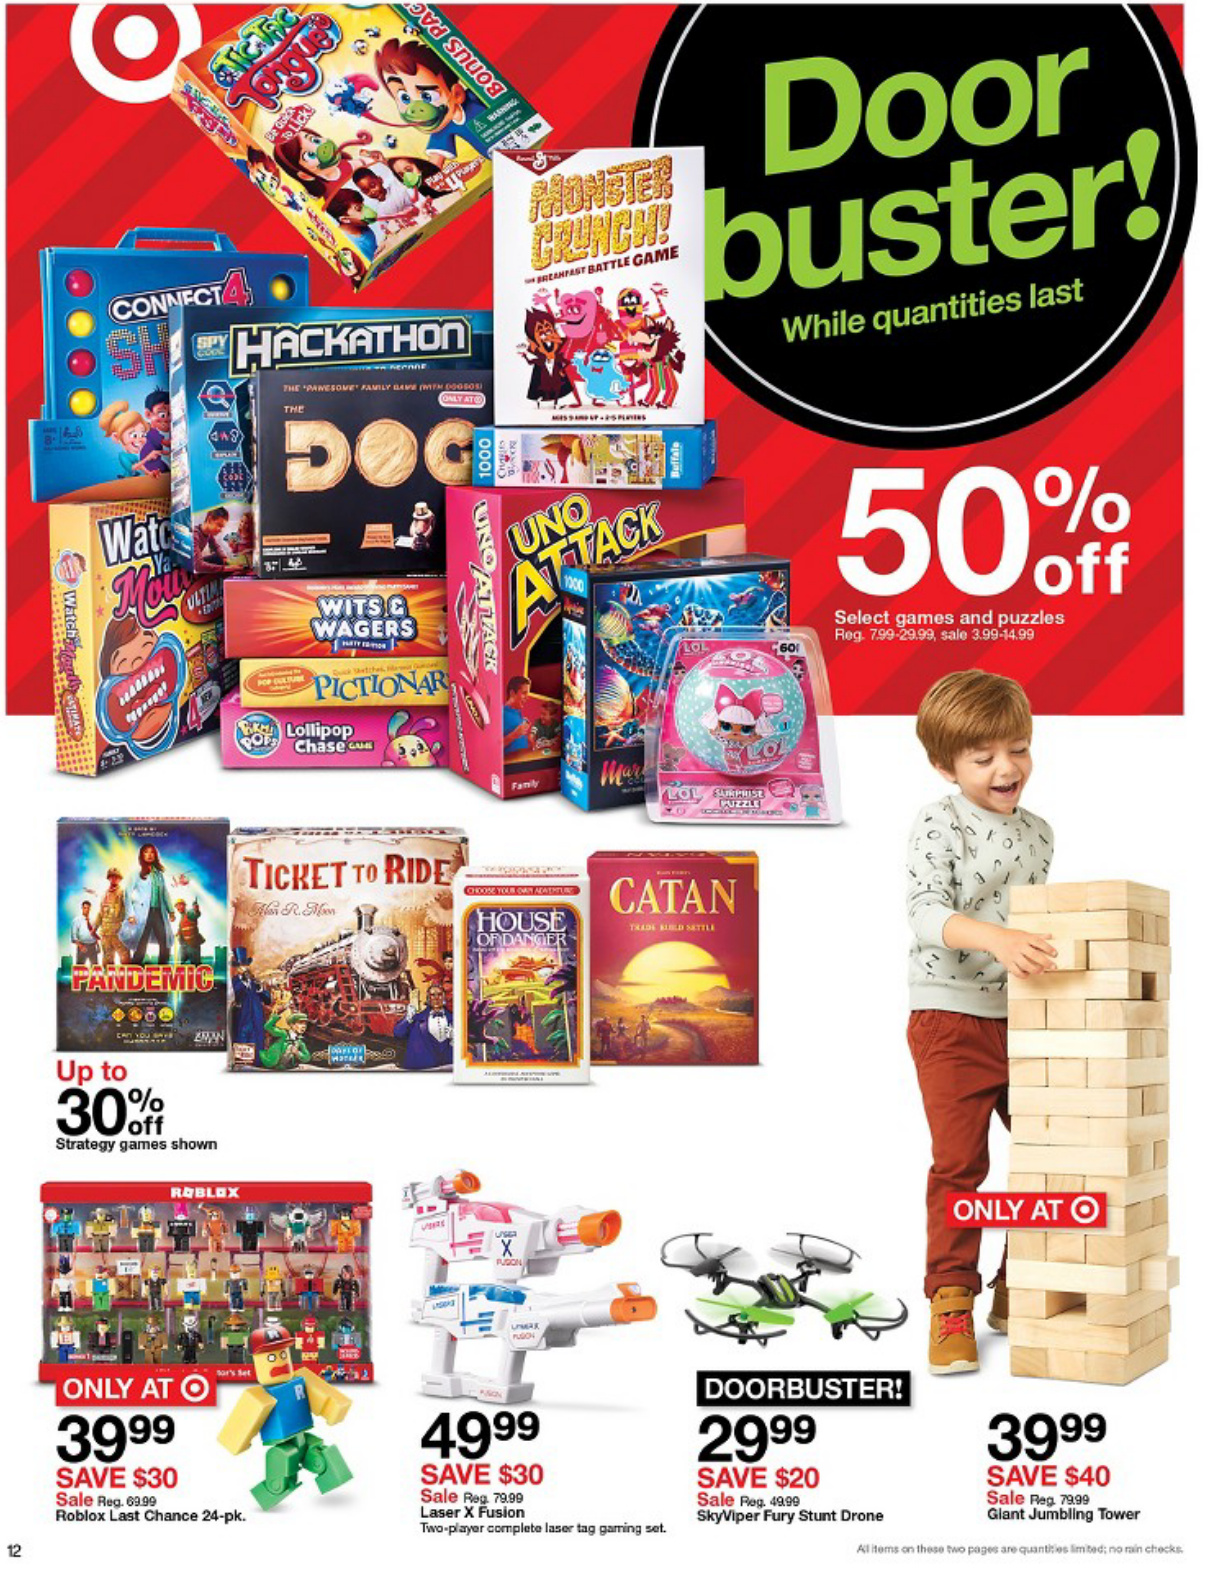 It’s Here! 2018 Target Black Friday Ad Preview | www.semadata.org - Part 5